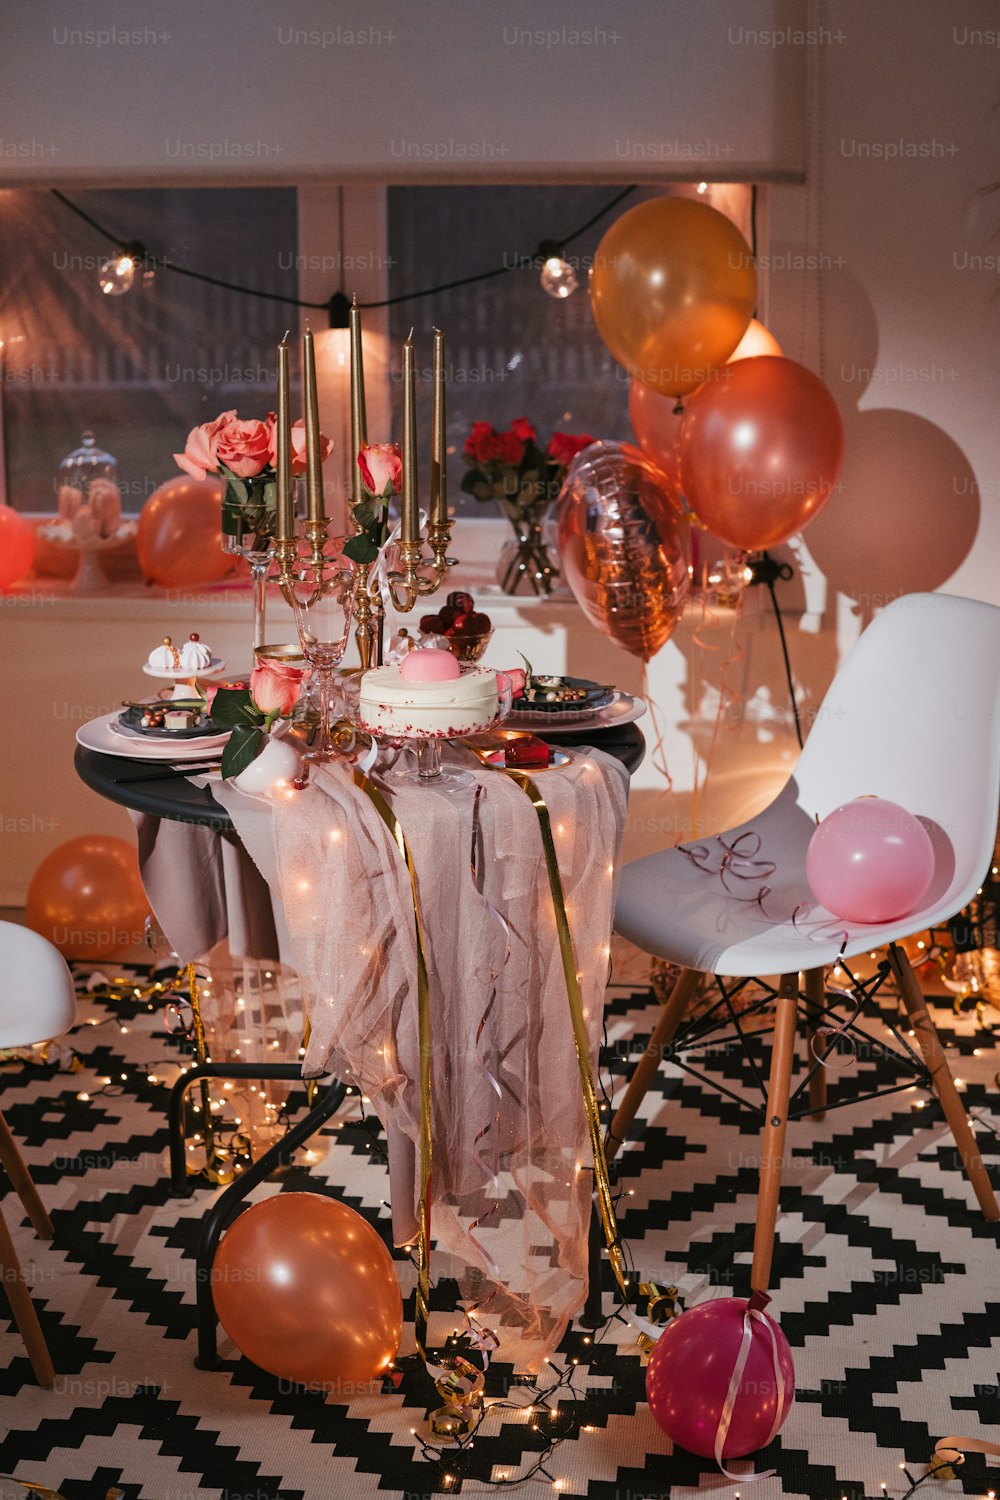 a table with a cake and balloons on it